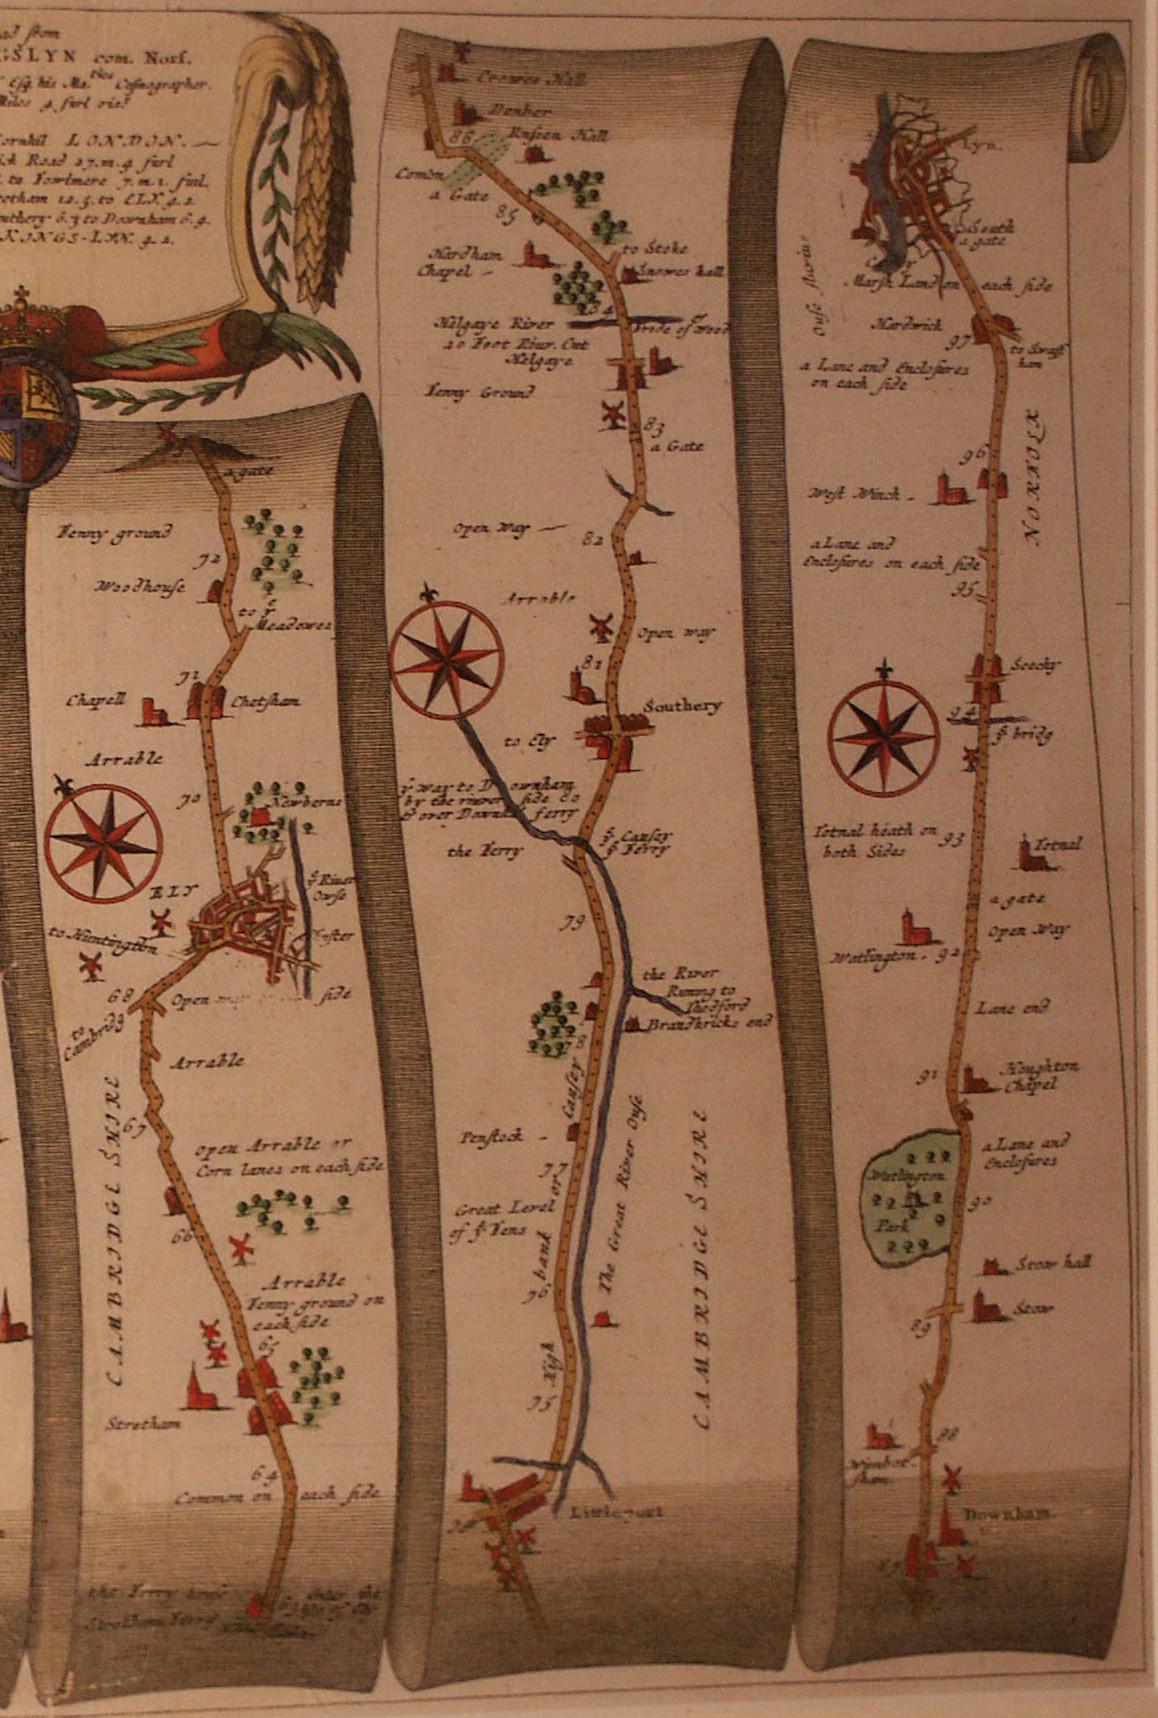 John Ogilby (British 1600-1676) Cosmographer and Geographick Printer to Charles II 
A road map from Britannia, 1675/6. The road from London to Kings Lynn, showing Royston to Downham

In a remarkable life John Ogilby pursued, several careers, each